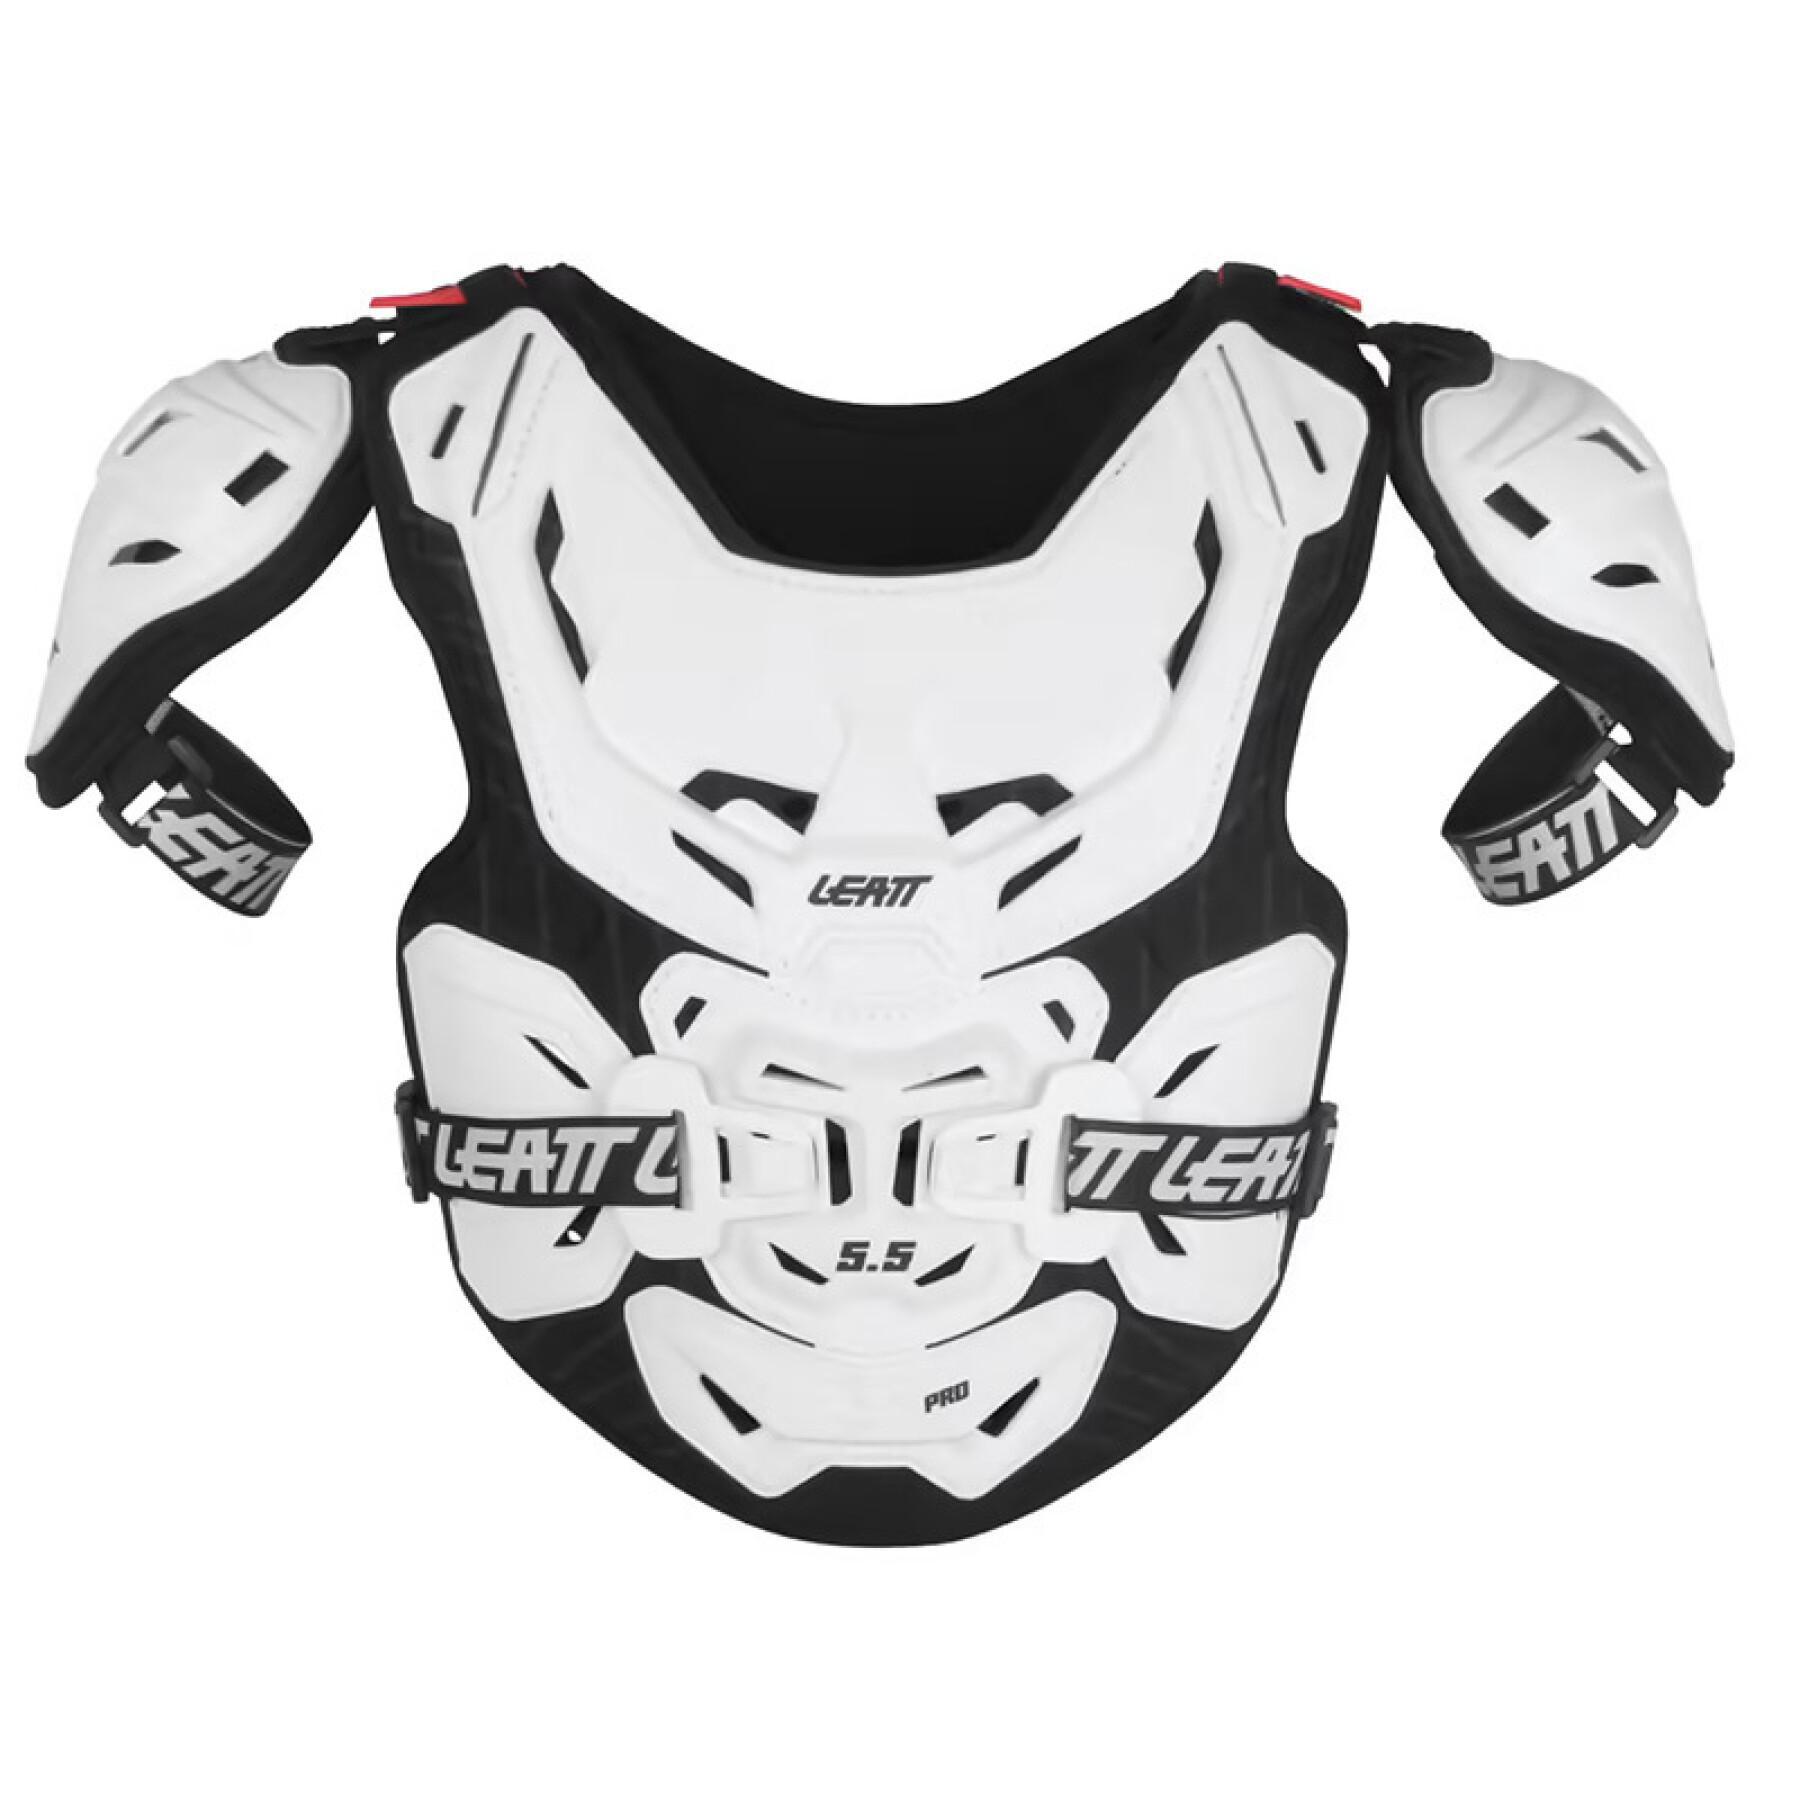 Child's motorcycle chest protector Leatt 5.5 Pro